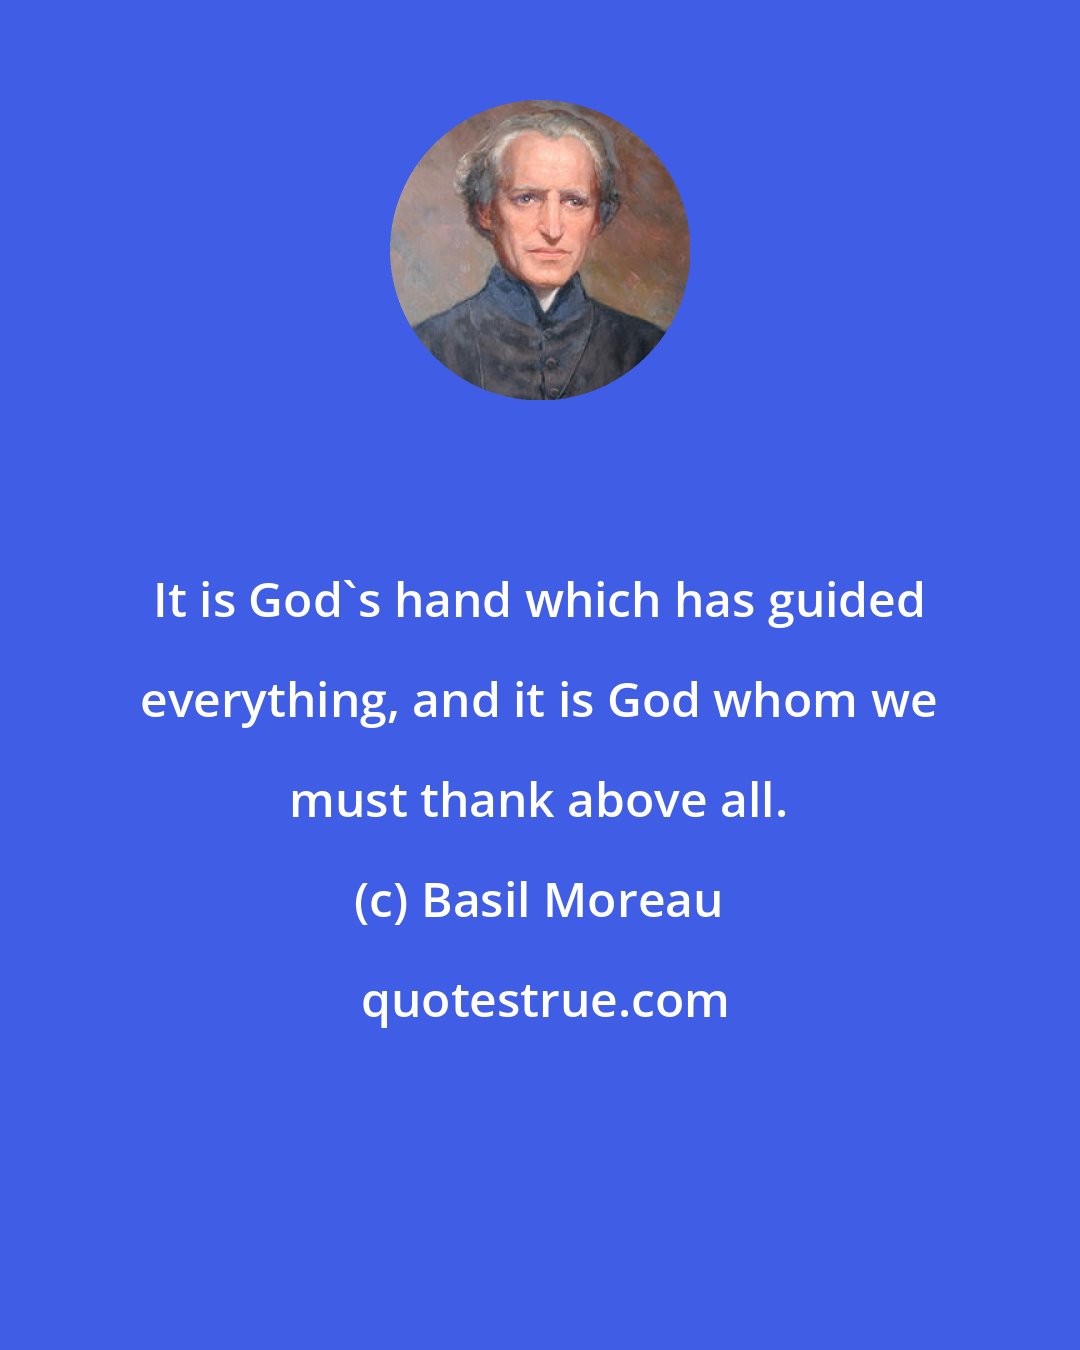 Basil Moreau: It is God's hand which has guided everything, and it is God whom we must thank above all.